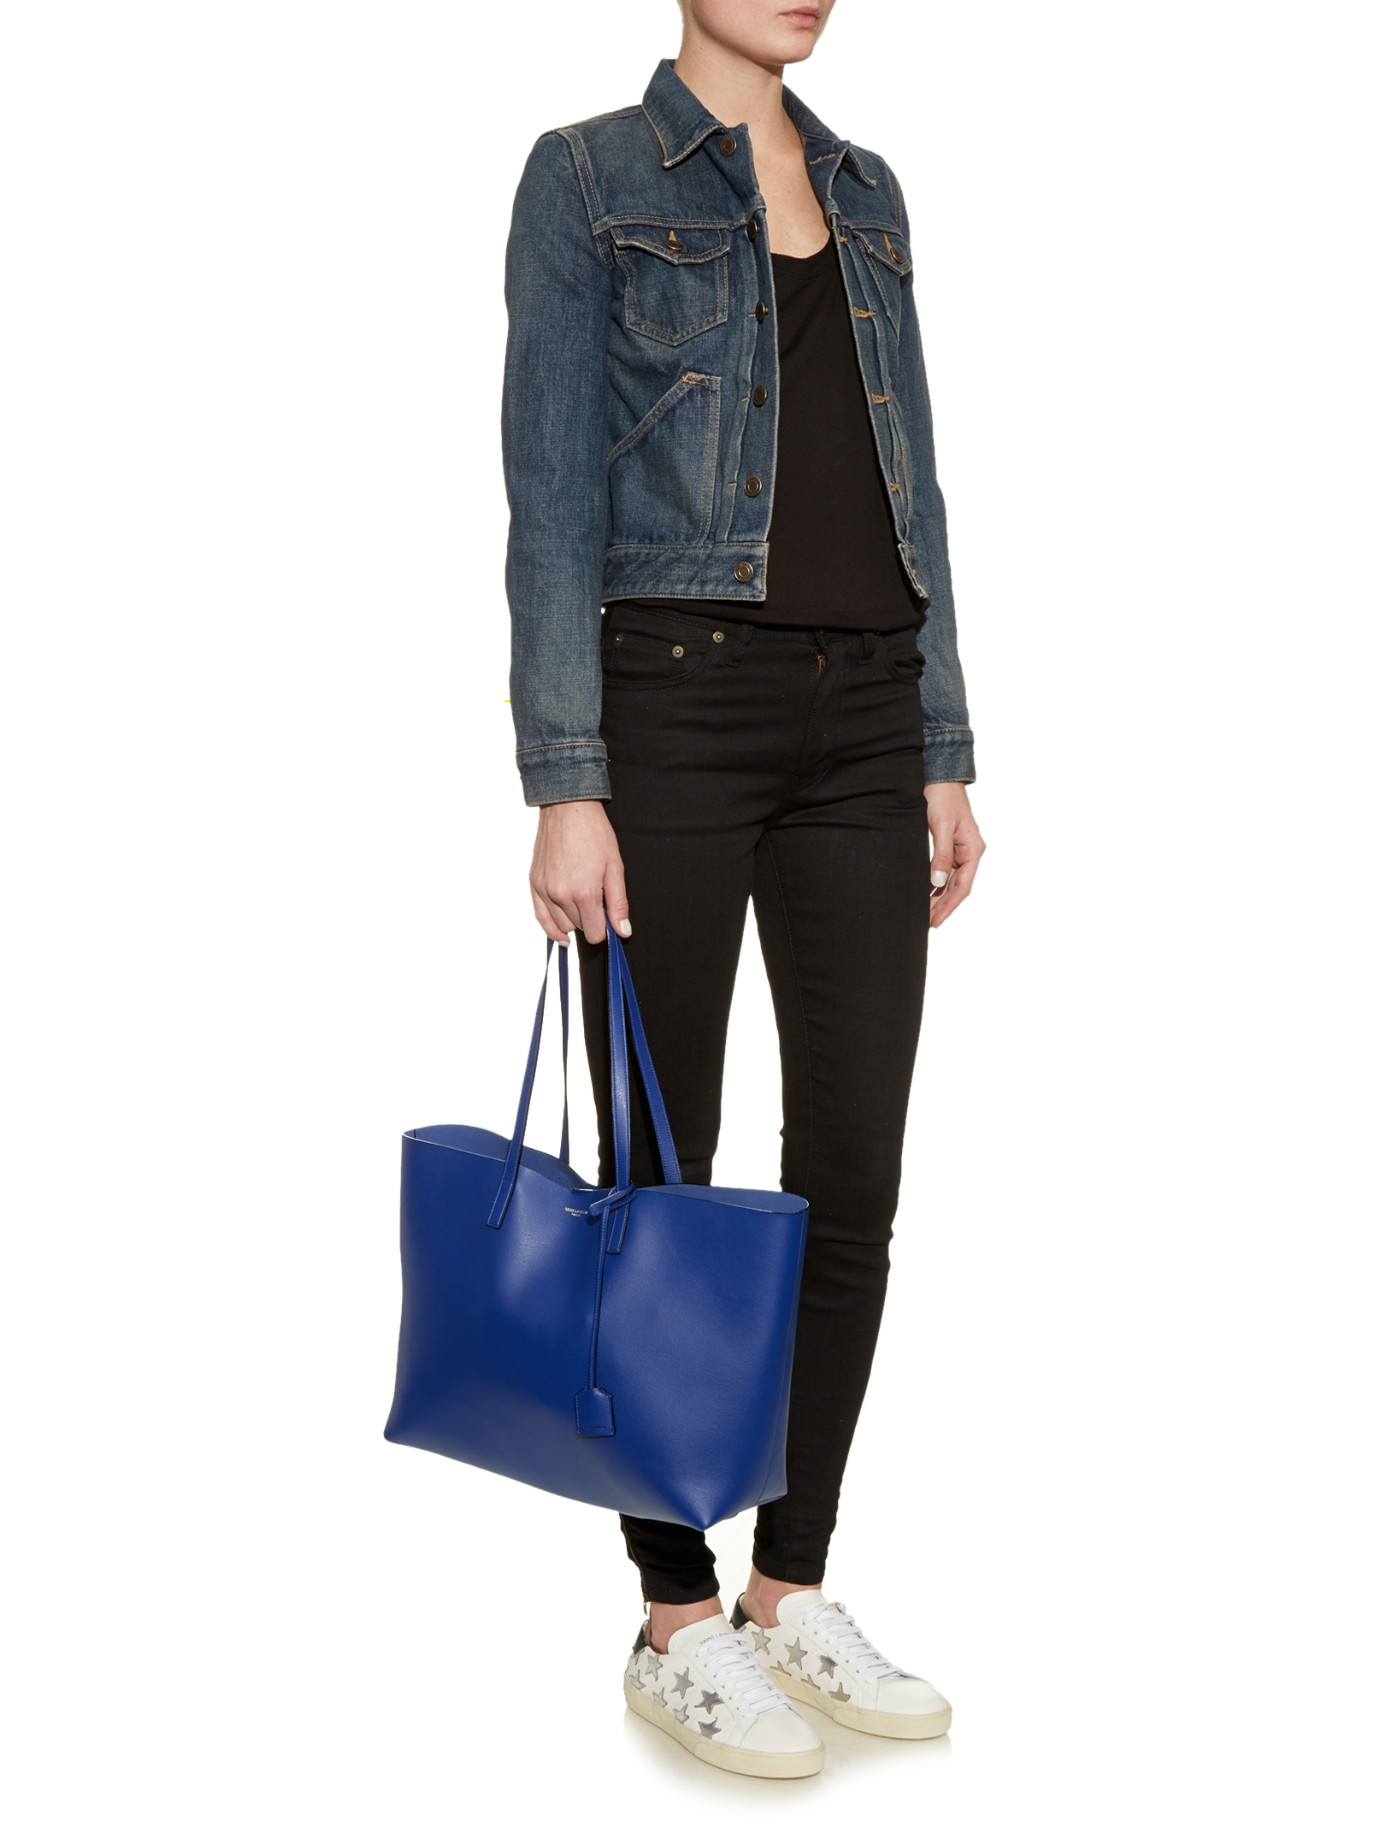 Saint Laurent Large Leather Shopping Bag in Blue | Lyst